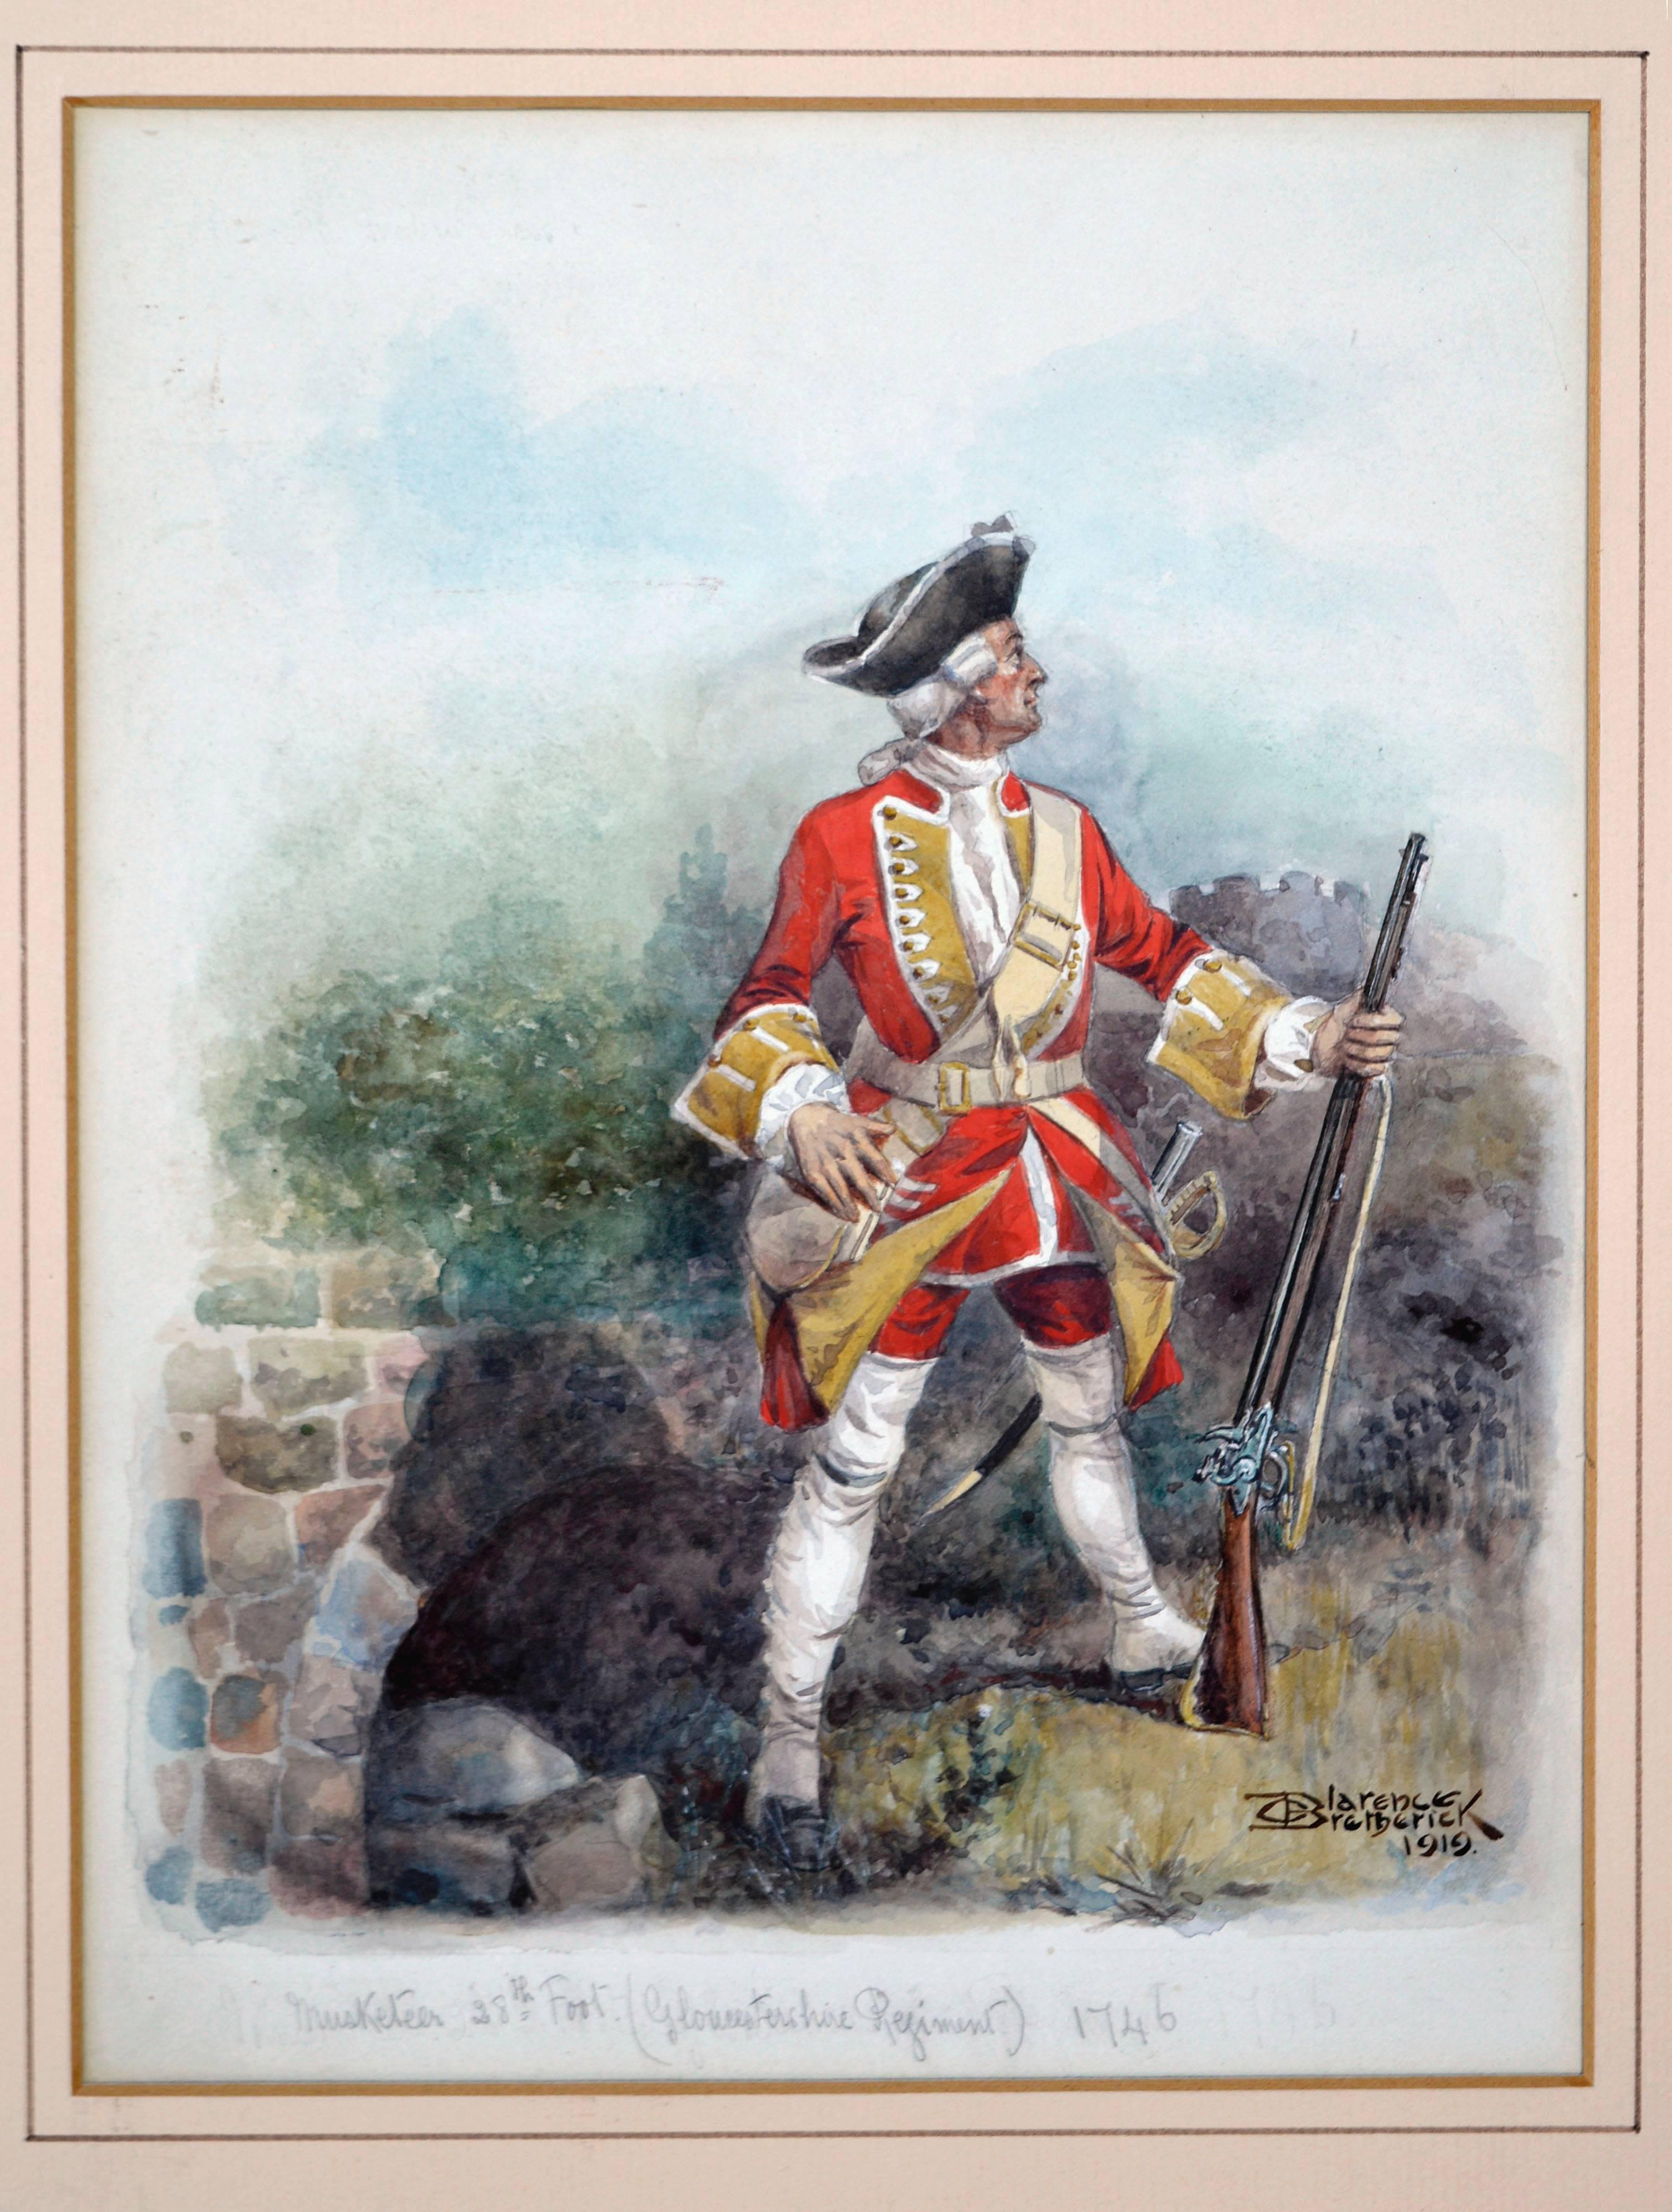 Musketeer 28th Foot (Gloucestershire Regiment) 1746 in Watercolor on Paper - Art by Clarence F. Bretherick